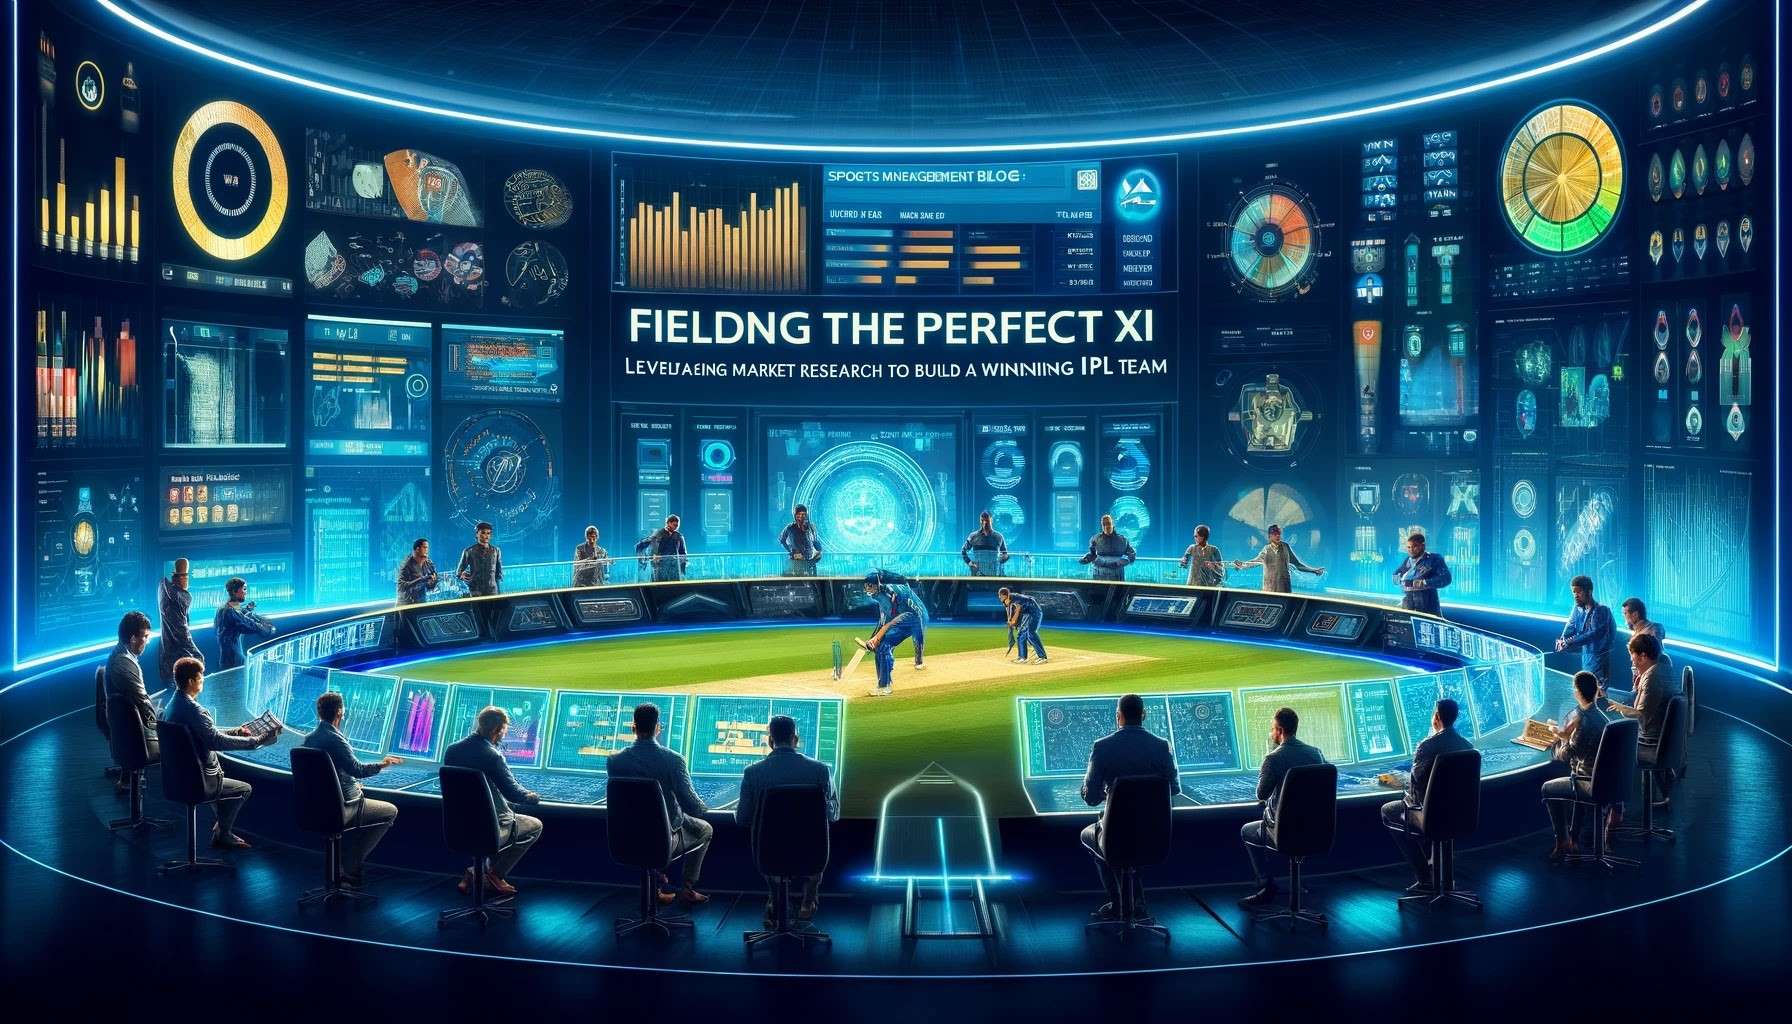 Fielding The Perfect XI: Leveraging Market Research To Build A Winning IPL Team